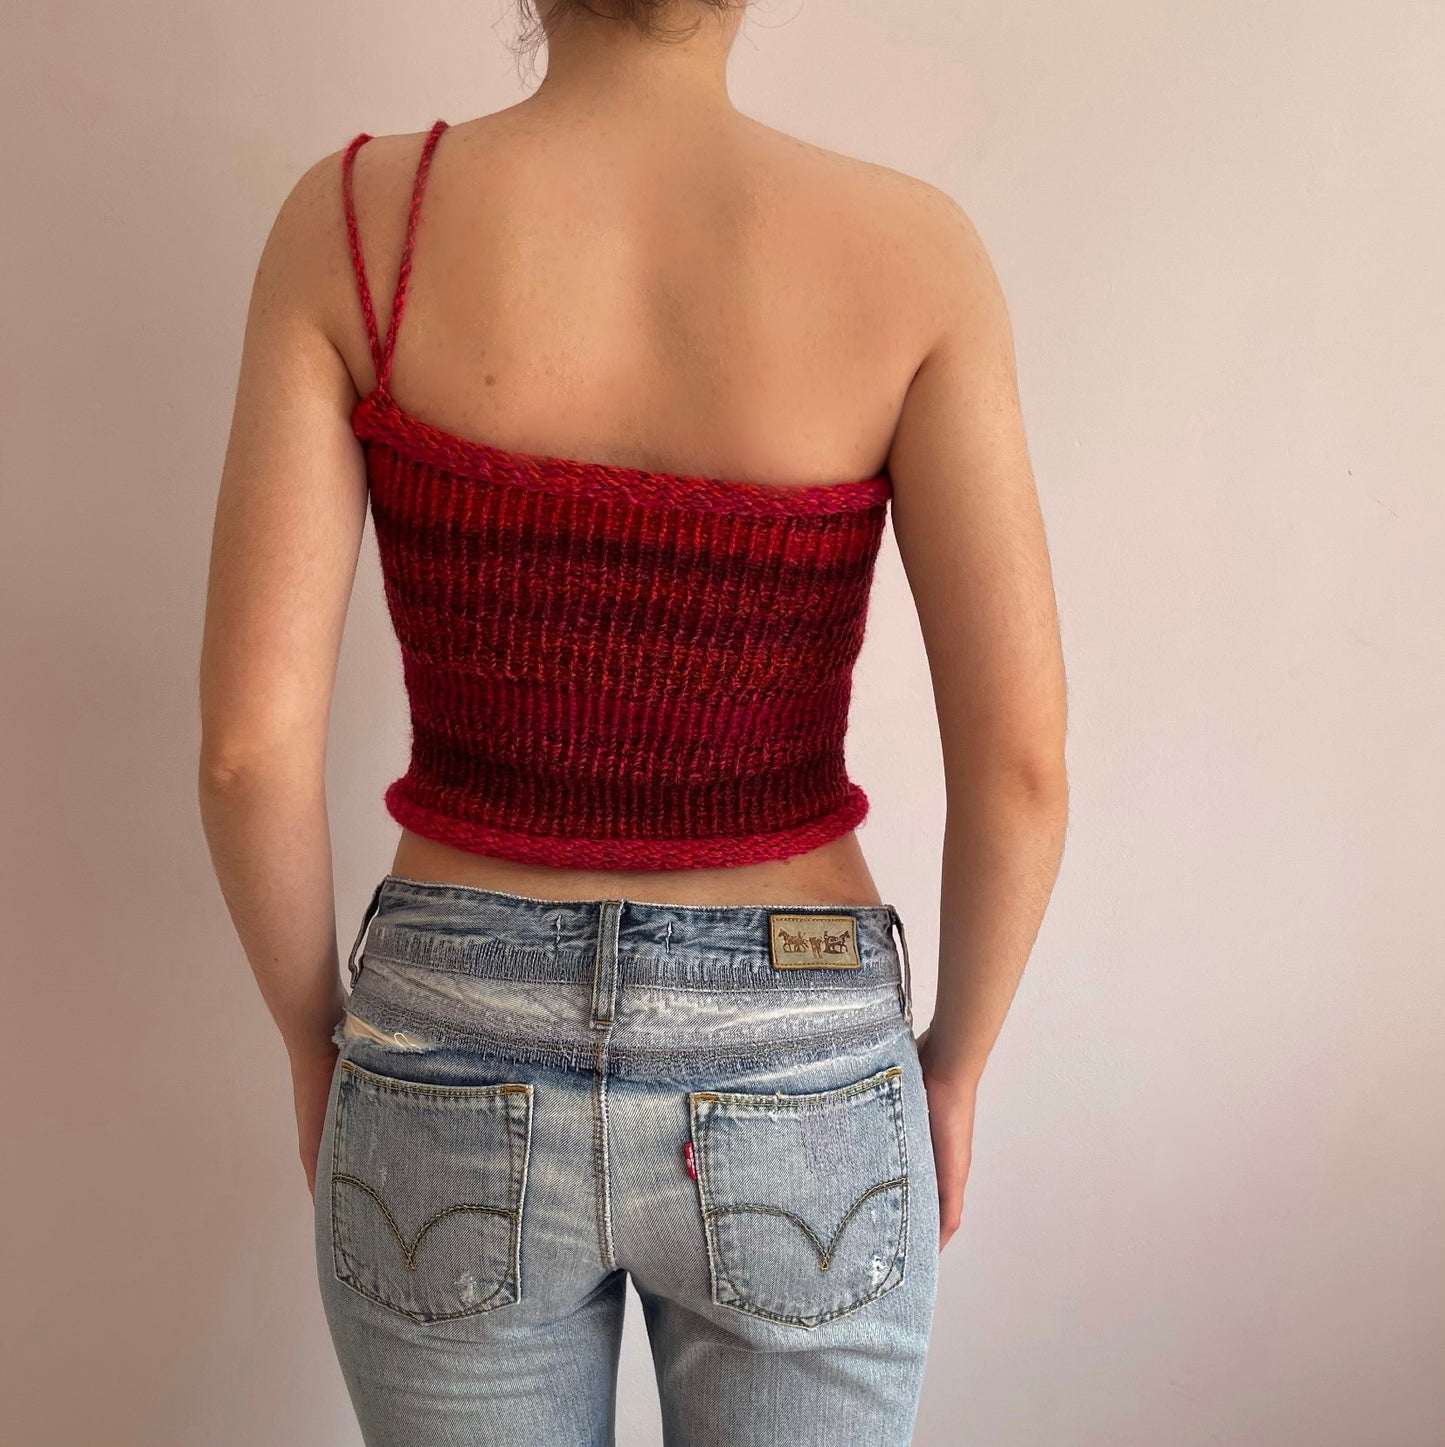 Handmade knitted asymmetrical top in red tones